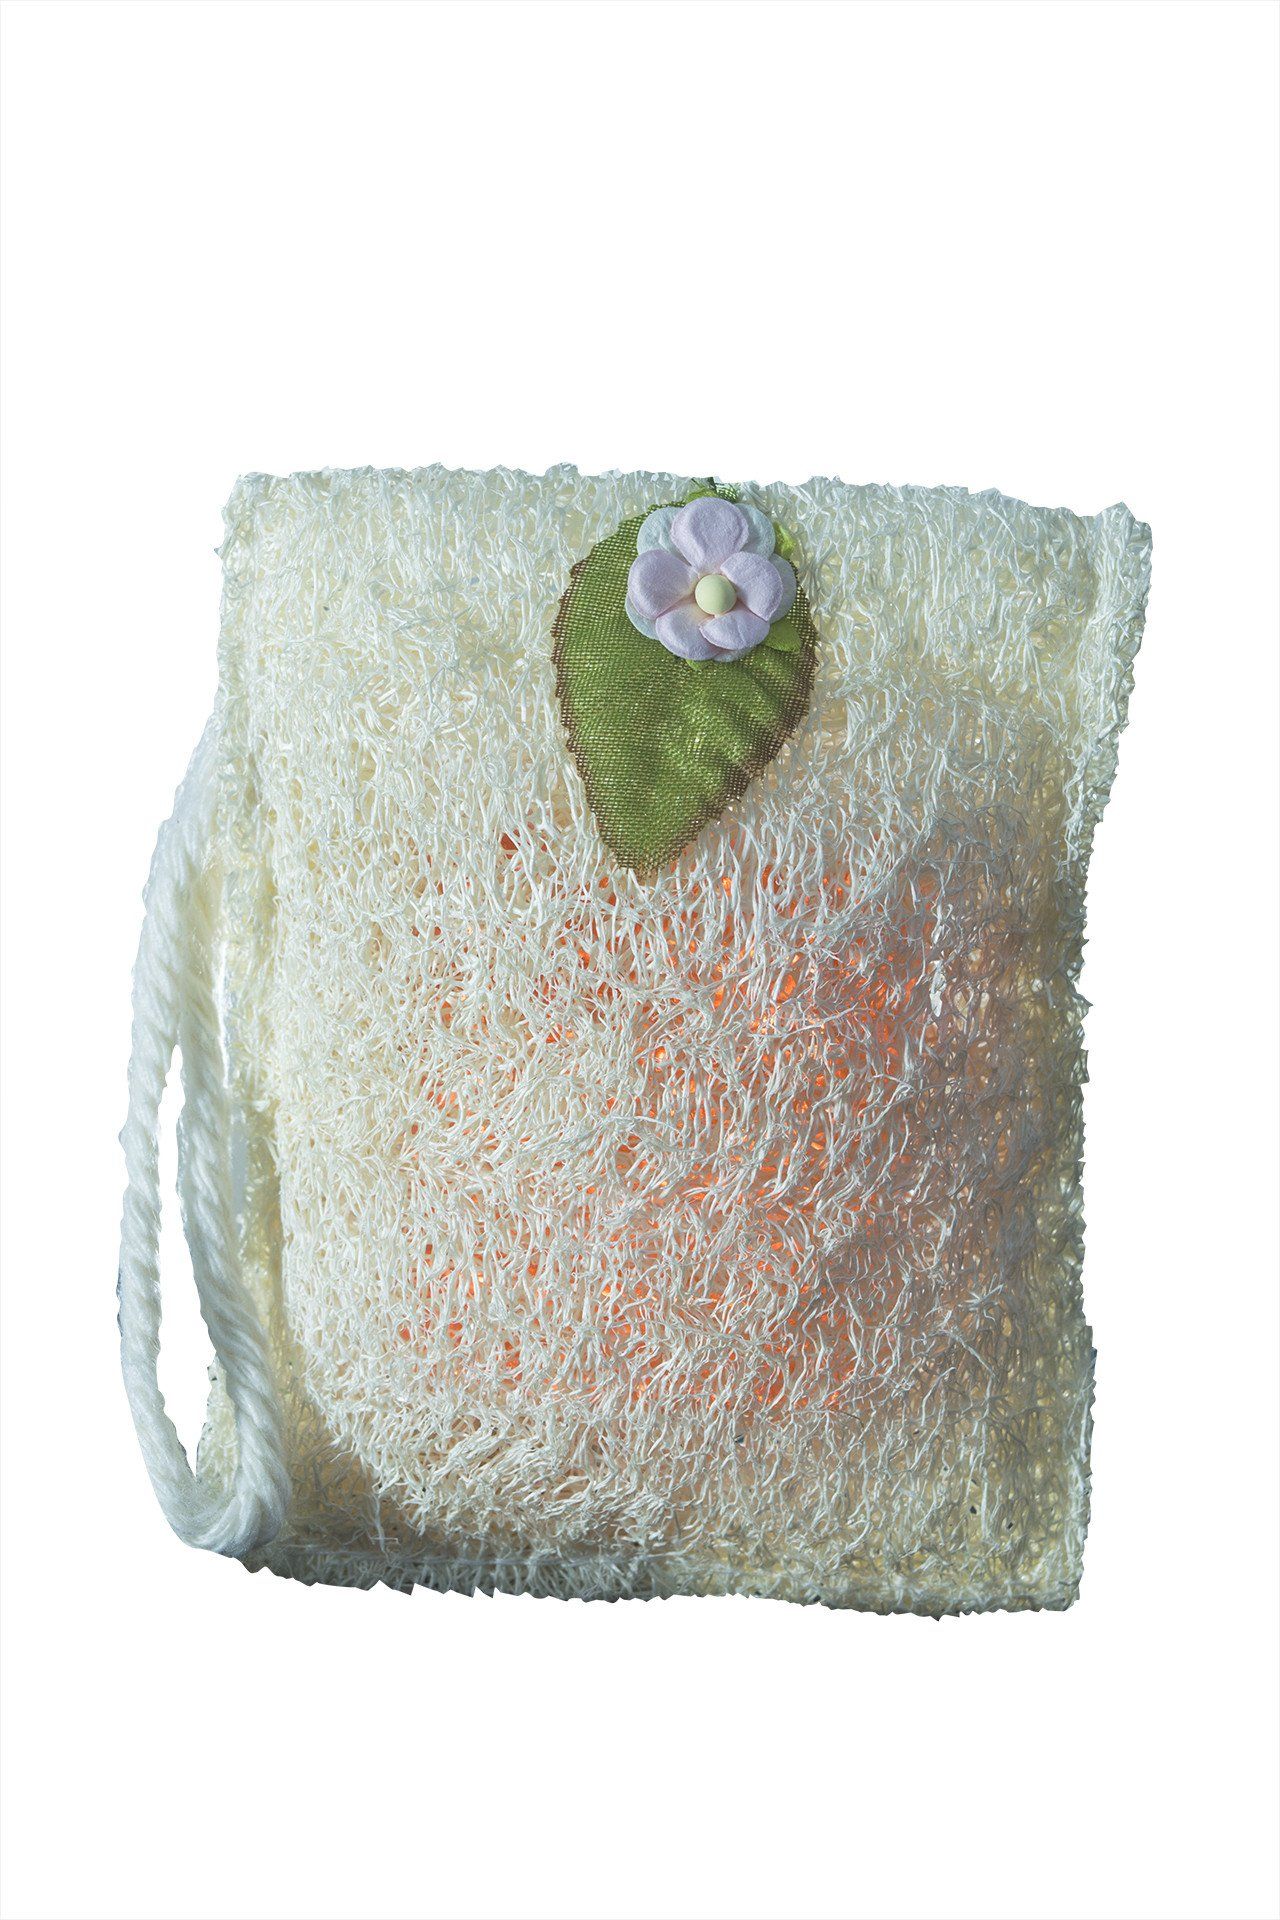 Natuaral Soap in Loofah (Luffa) - Natural Home Spa - CCCollections